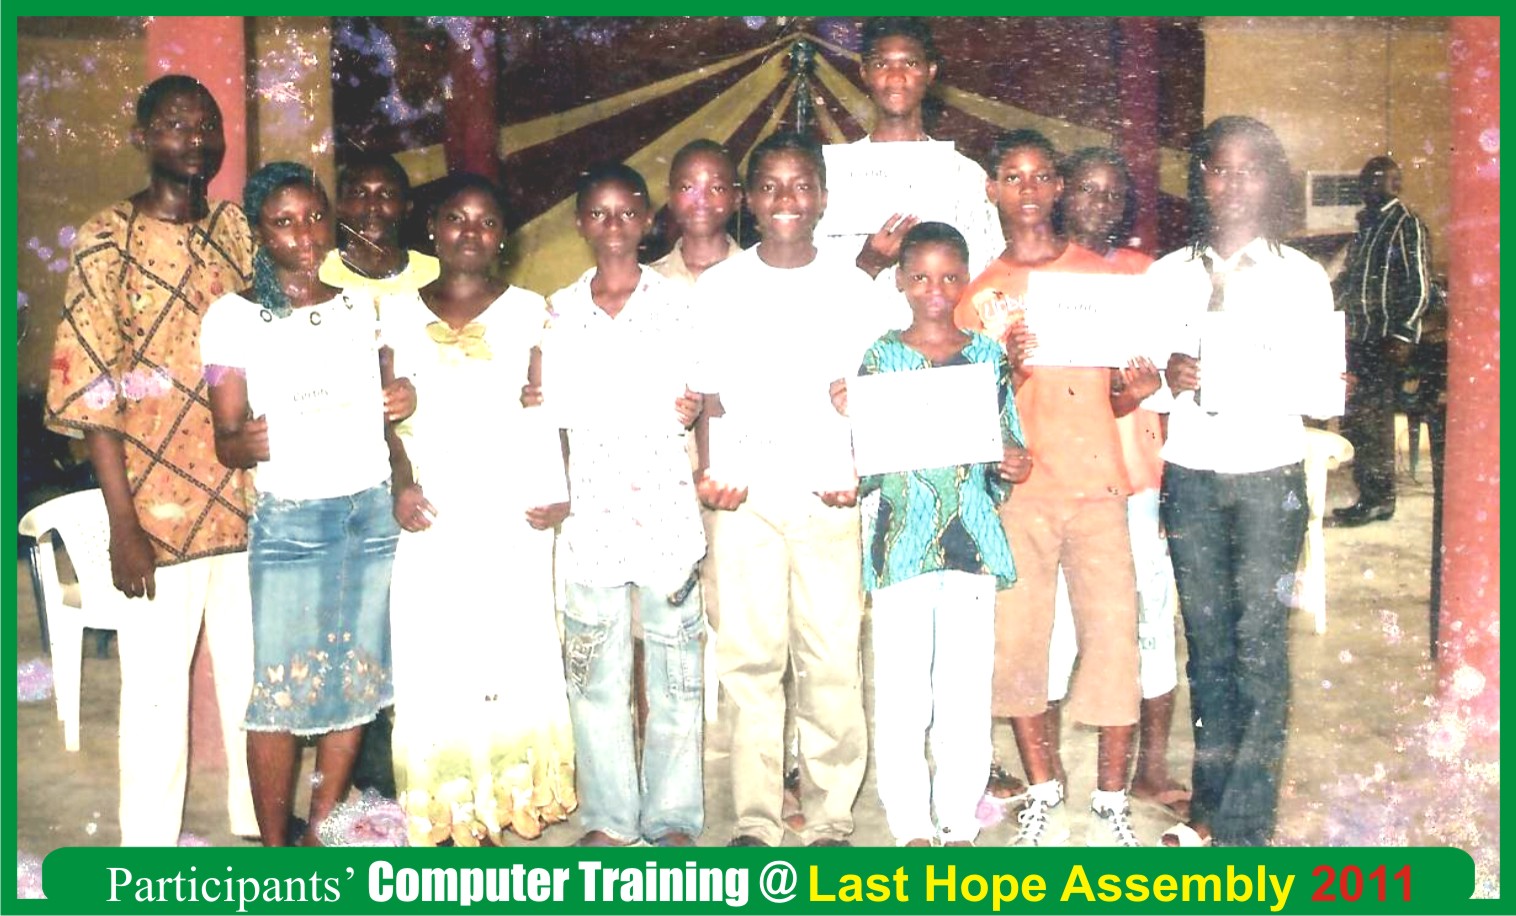 Computer Training - Participants at Last Hope Assembly 2011